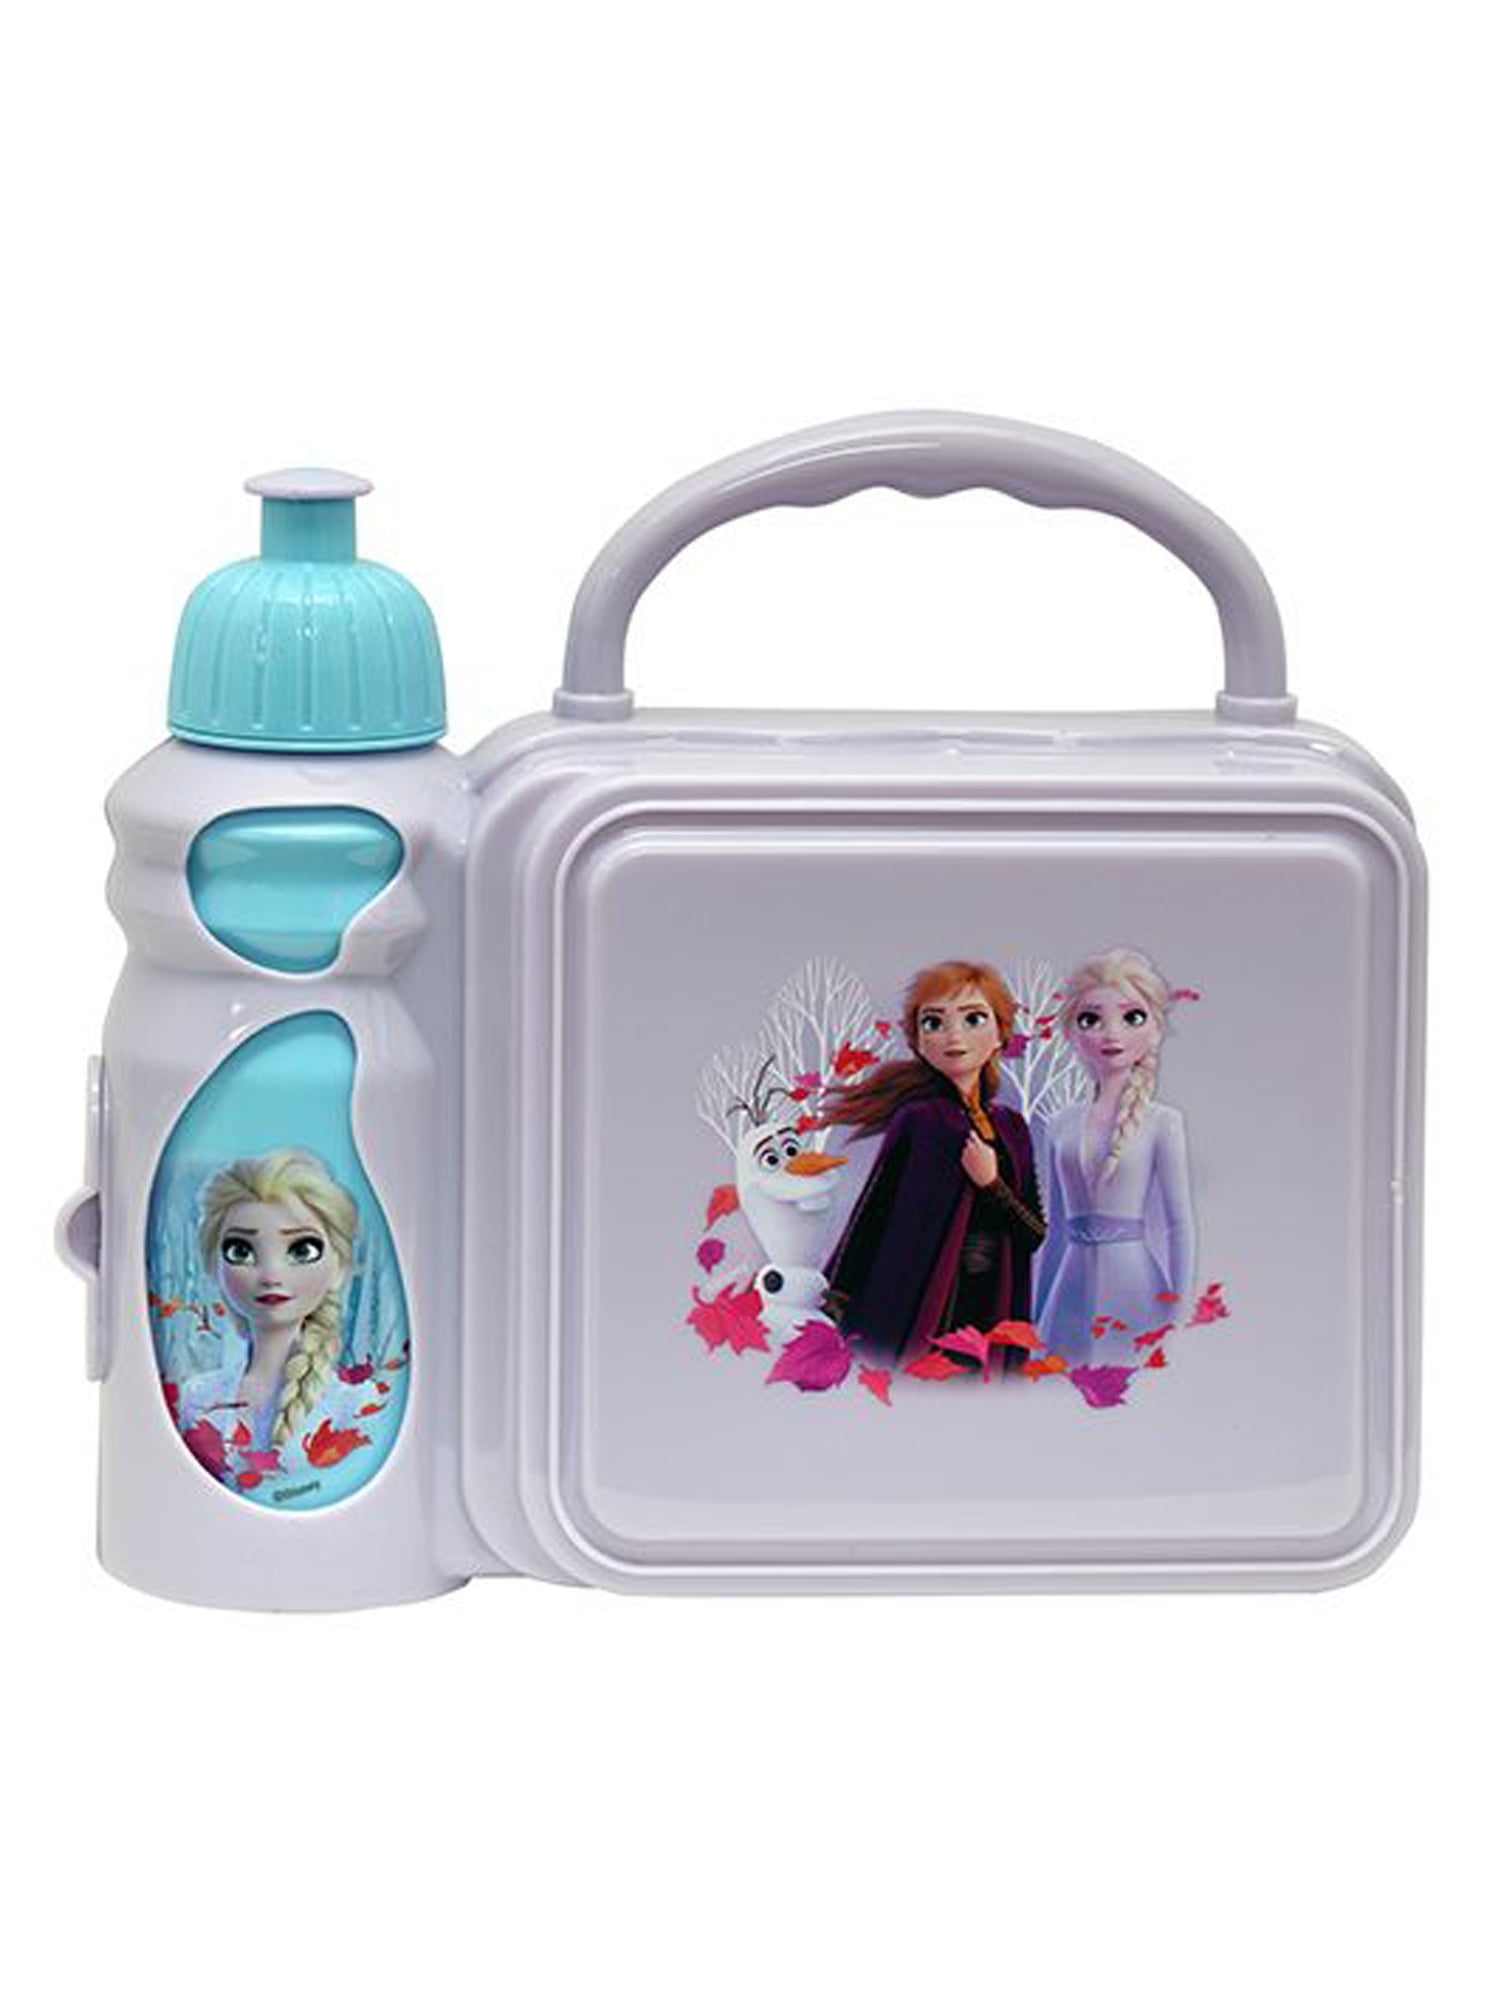 Disney Frozen Lunch Box Container Blue Girls Microwavable Made in Japan